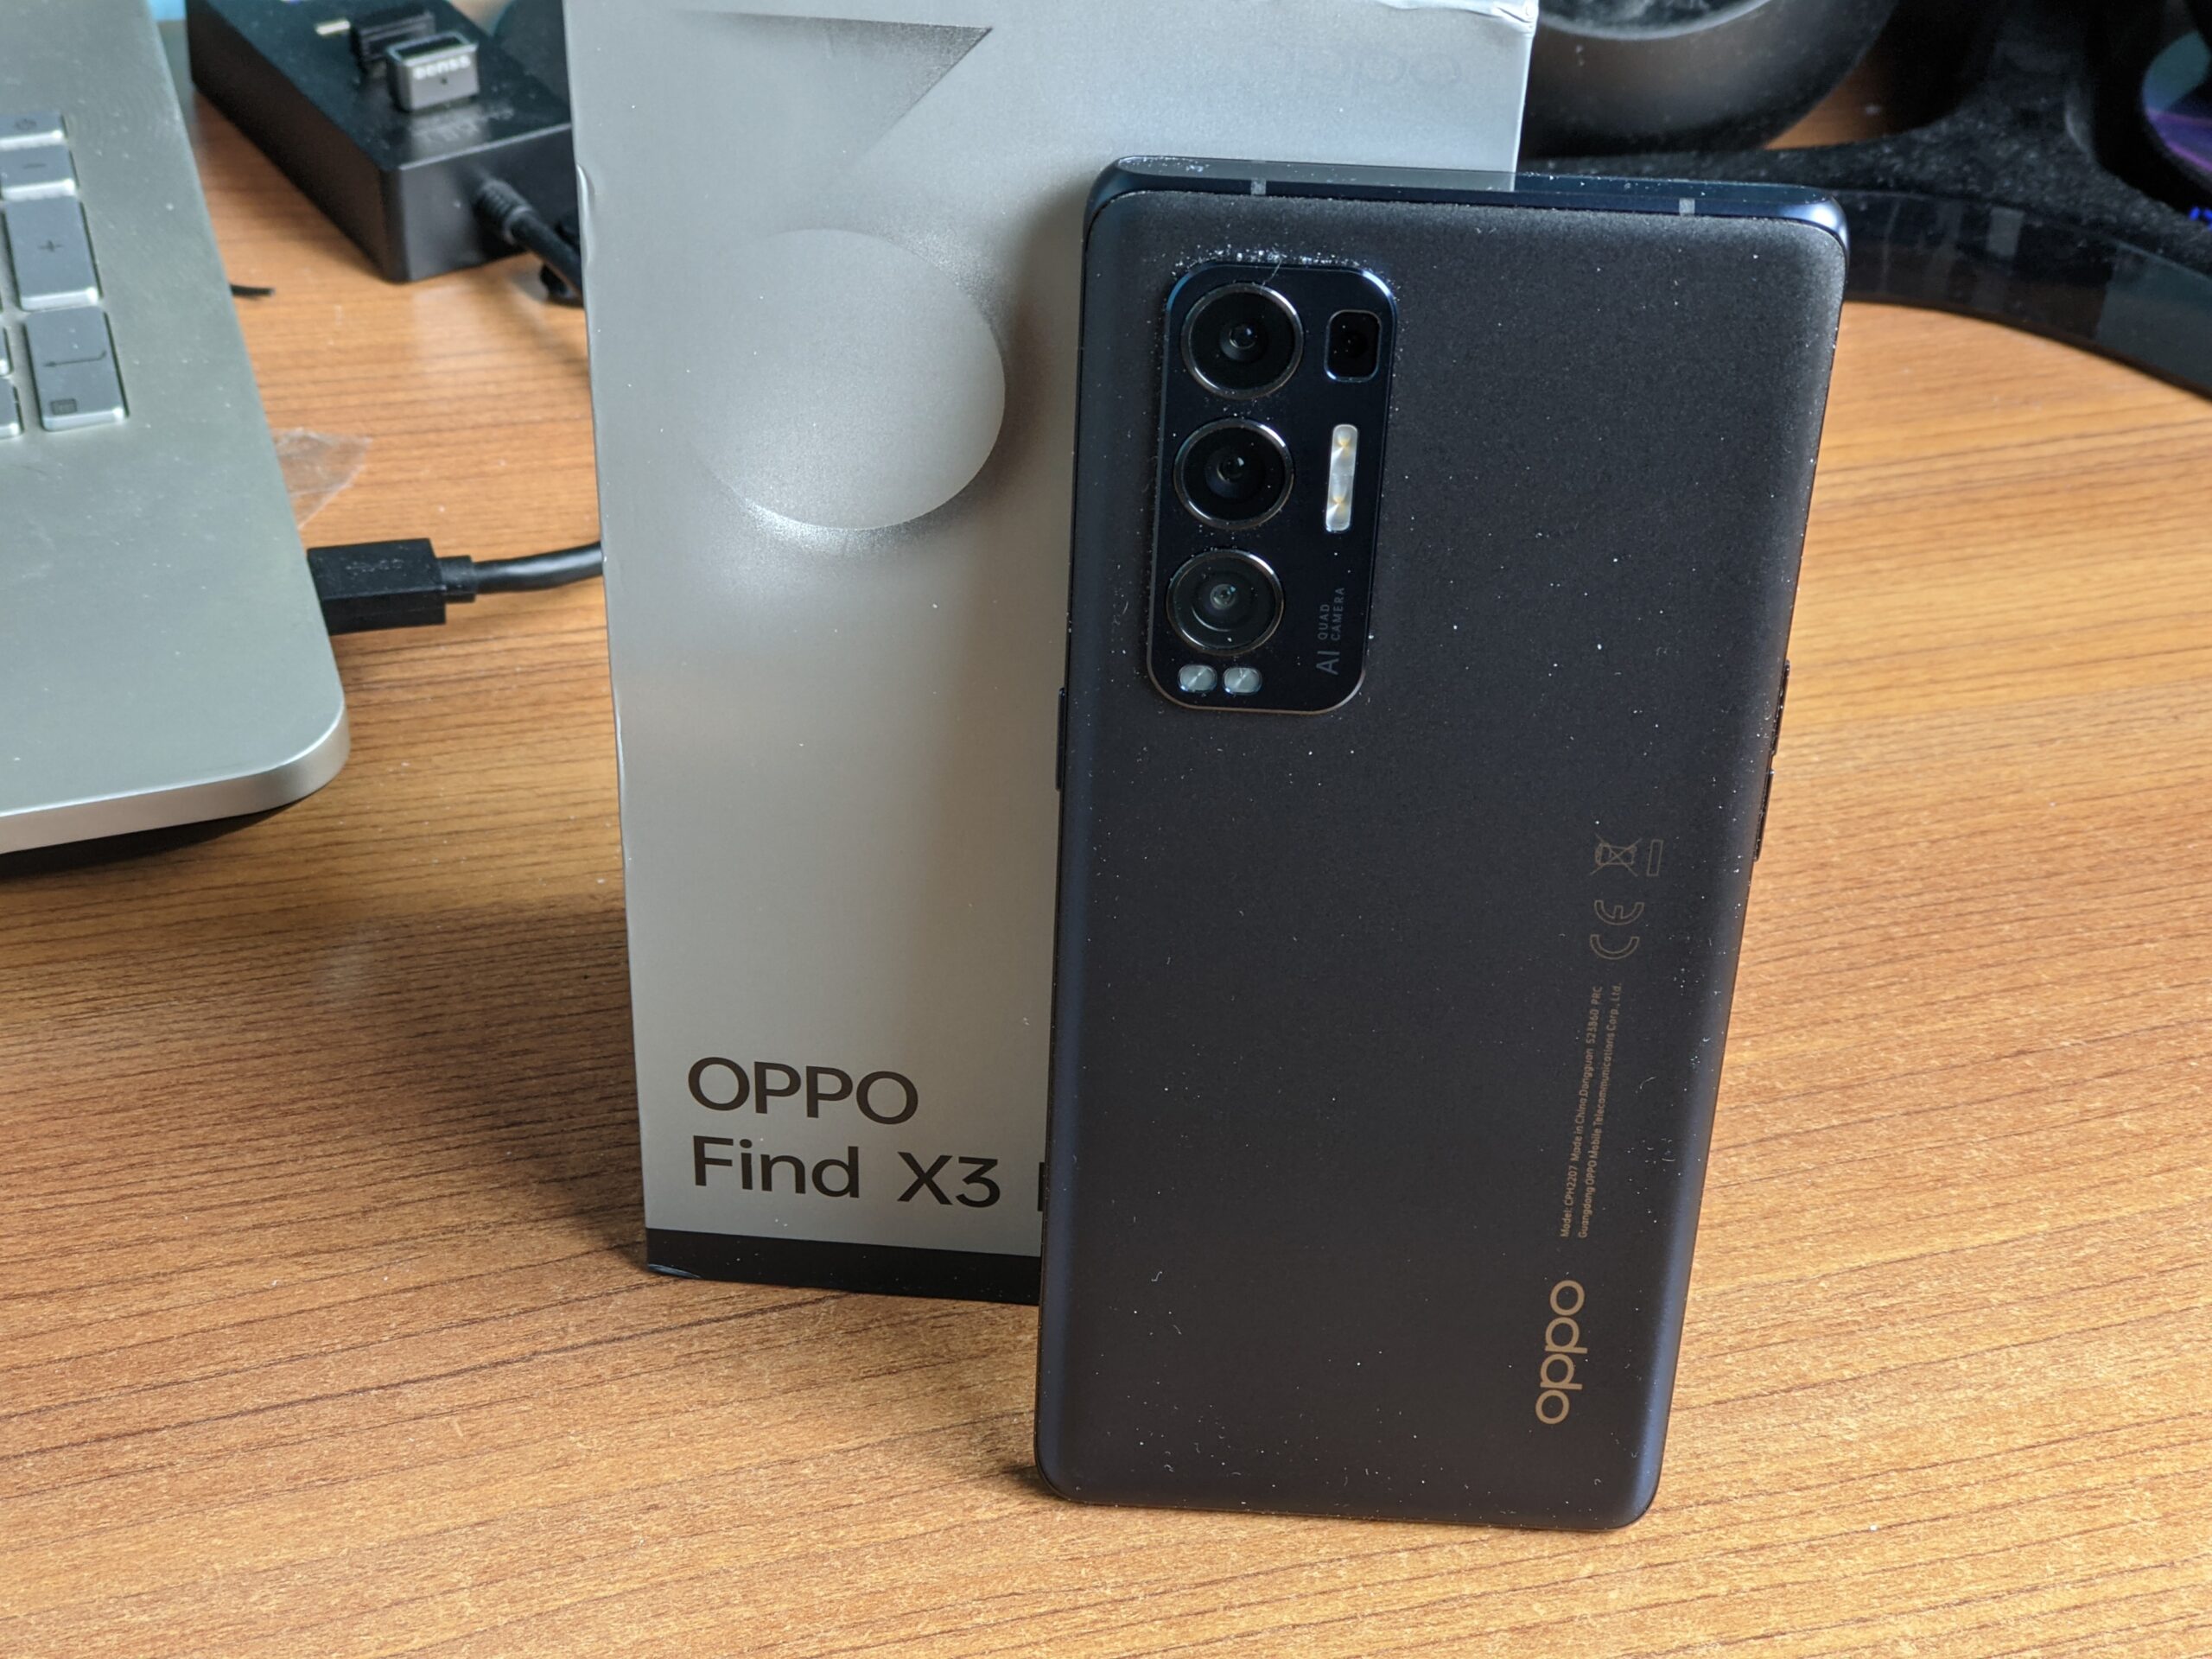 PXL 20210418 200730326 scaled - Oppo Find X3 Neo recensione